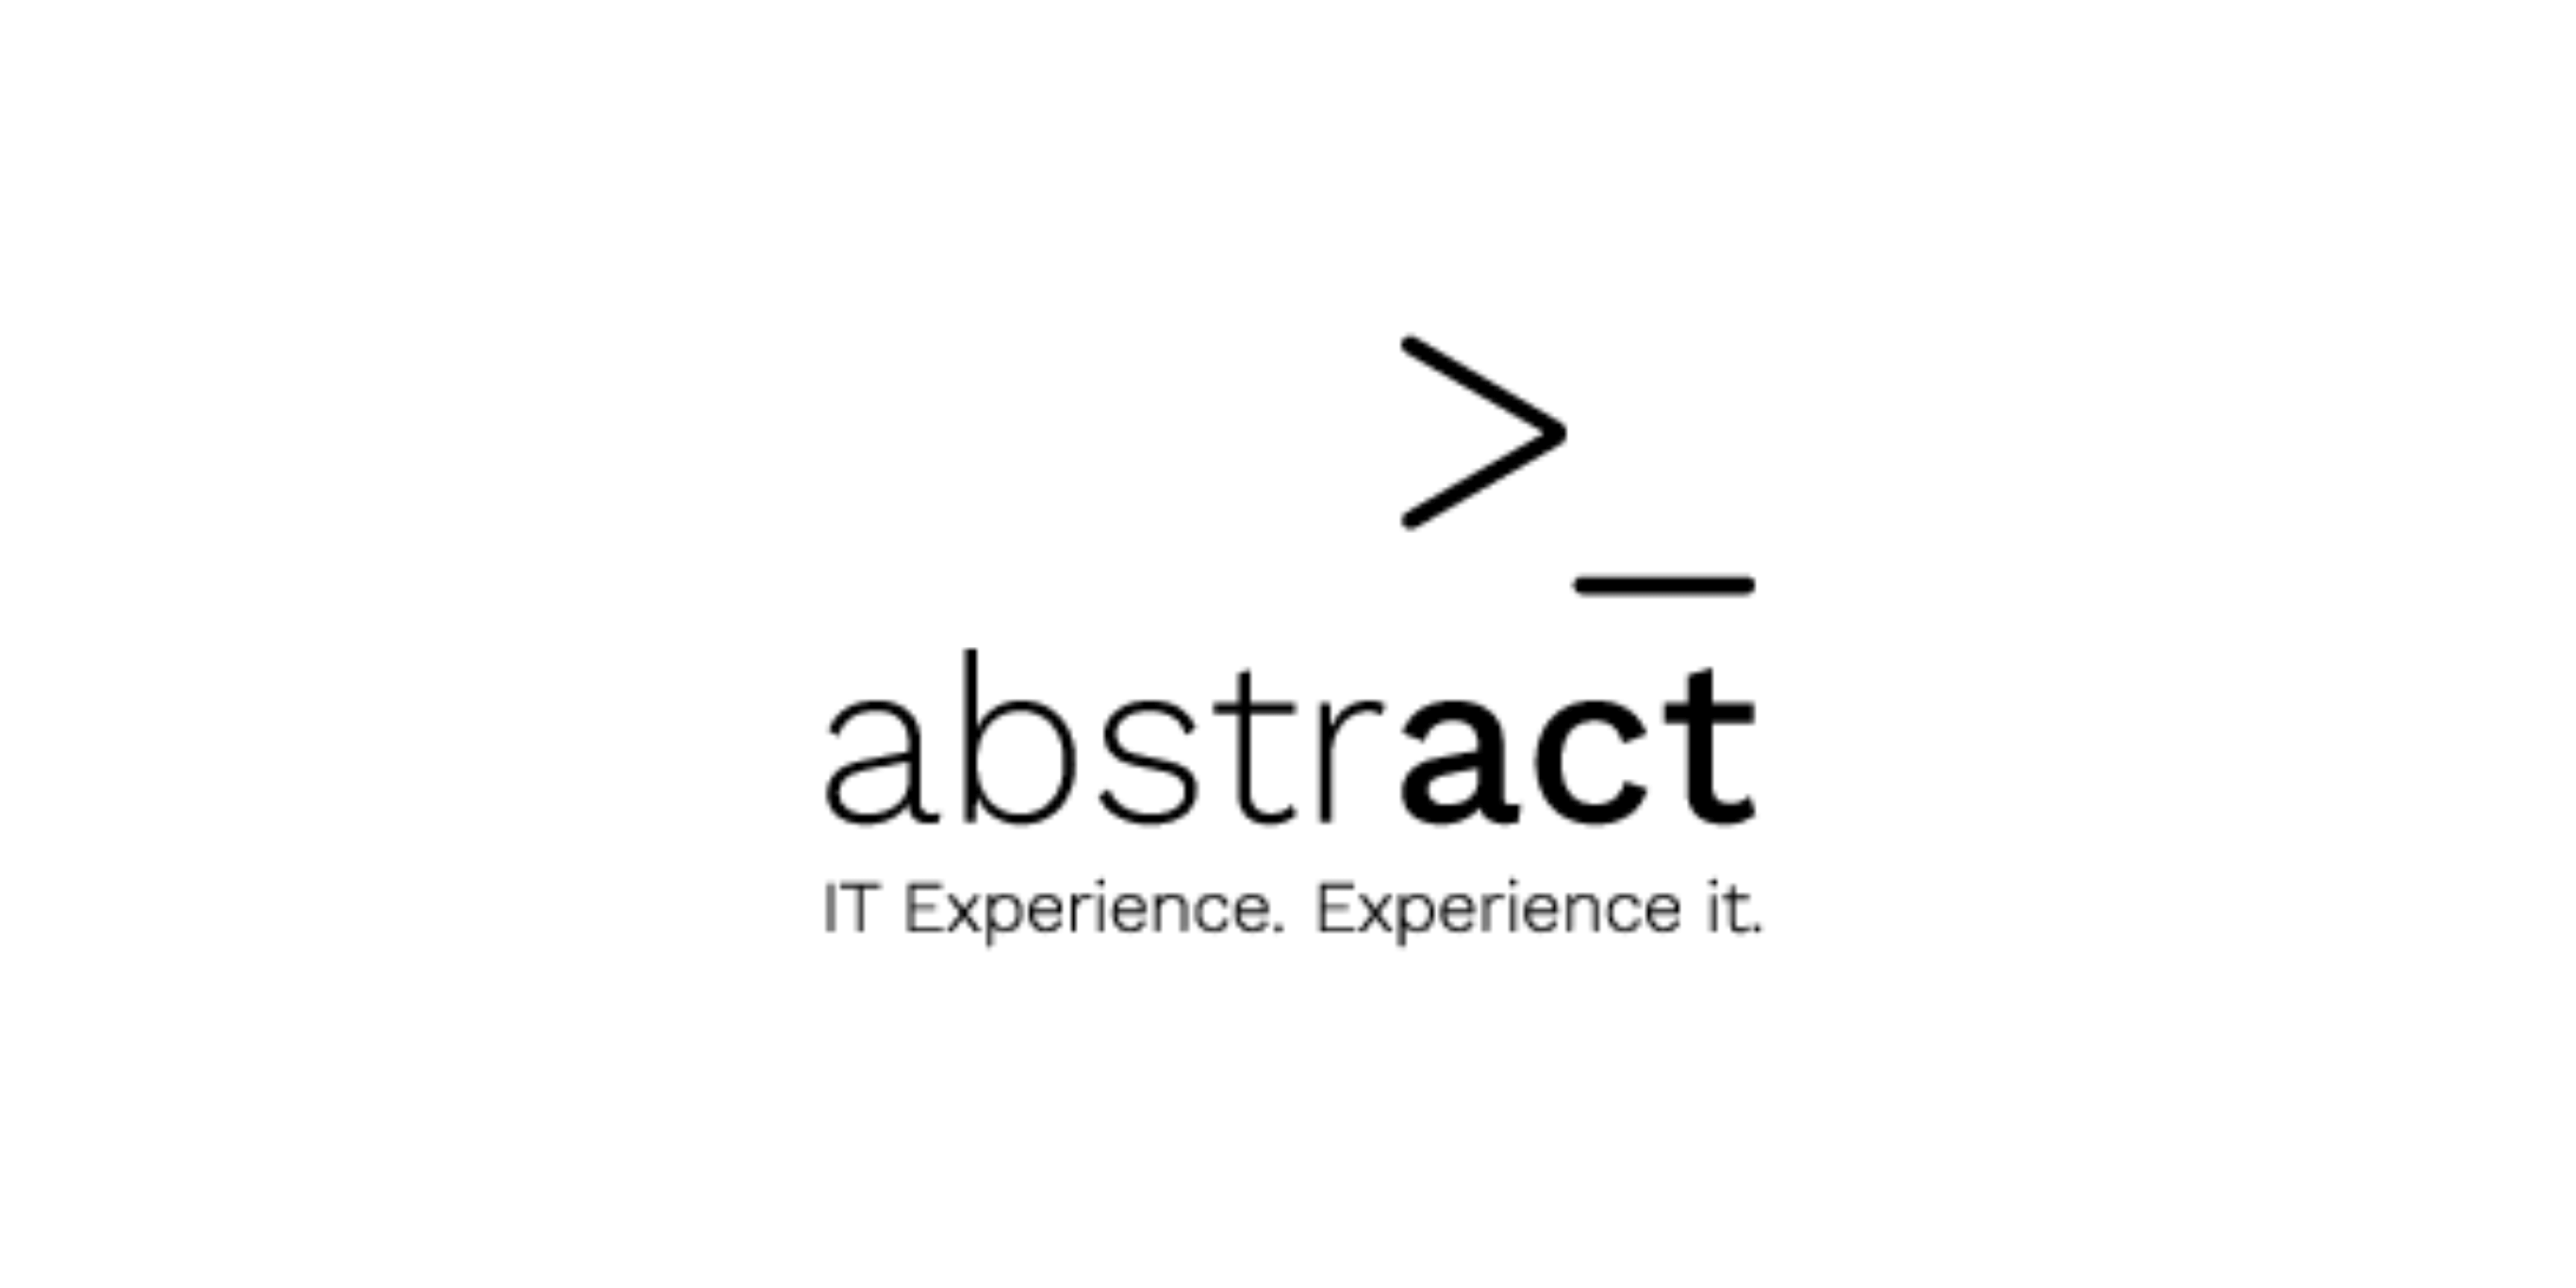 Abstract LMS